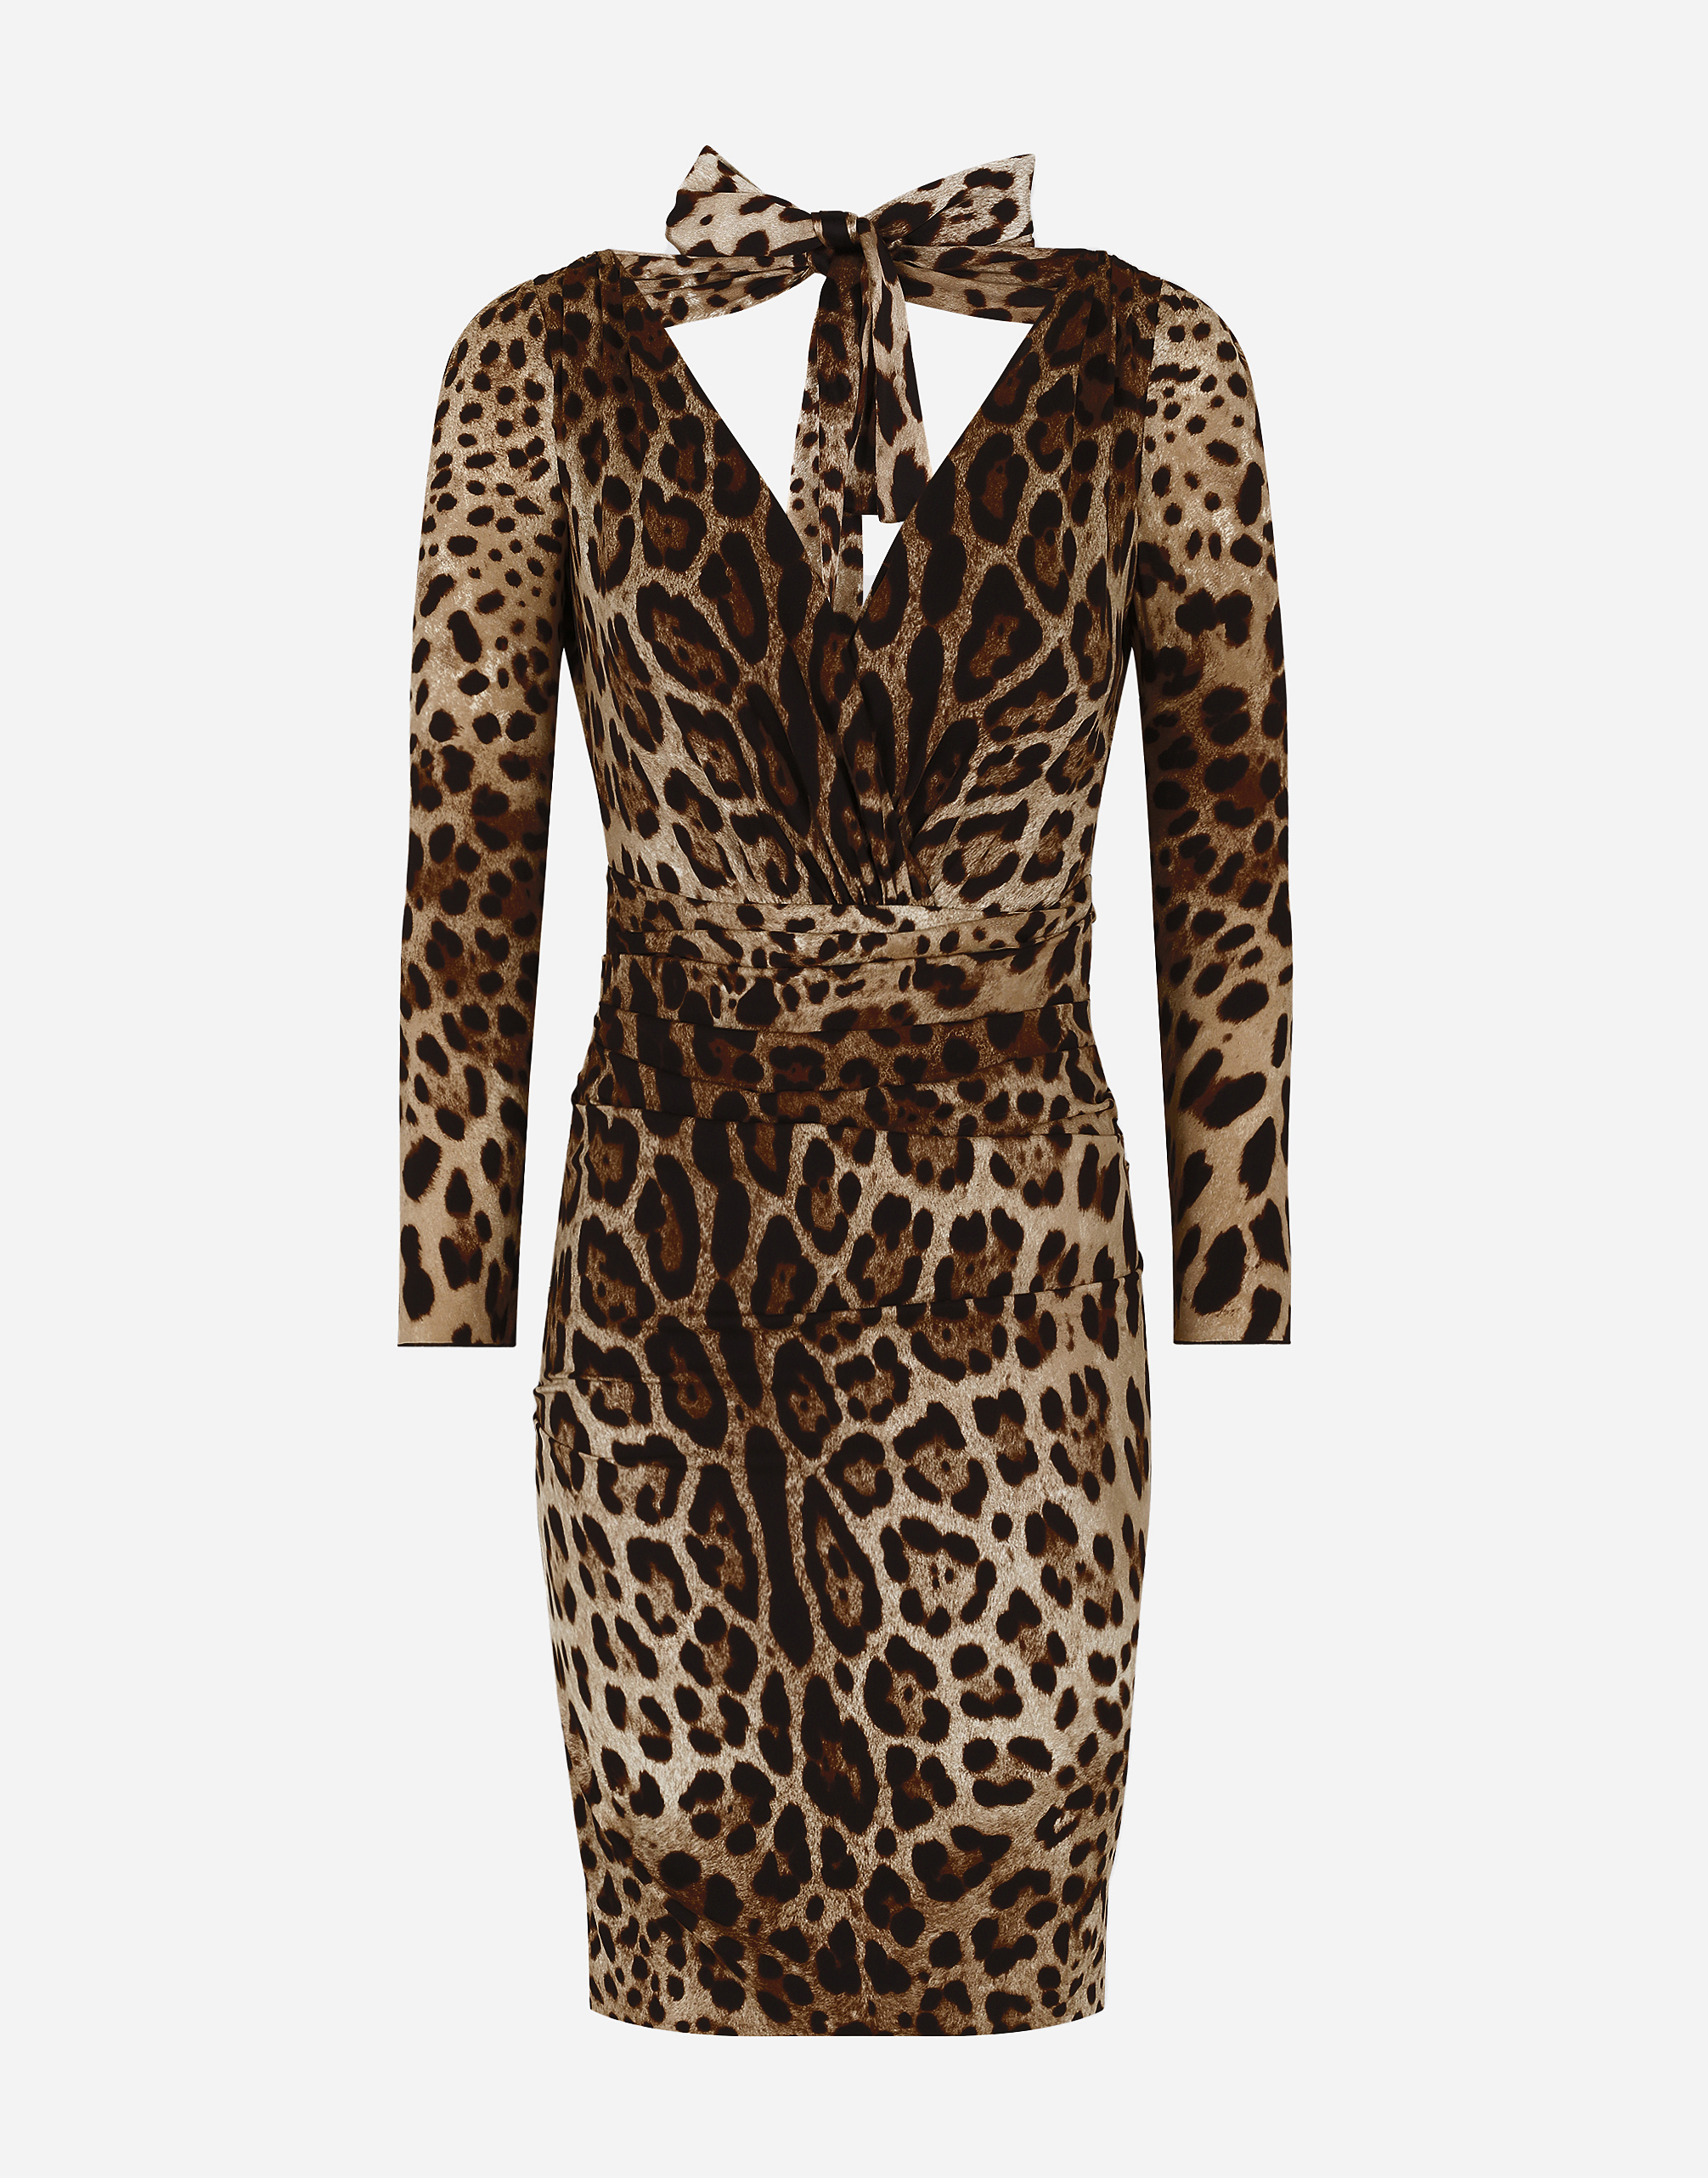 Dolce & Gabbana Dresses - Short Charmeuse Dress With Leopard Print And Tie  In Animal Print